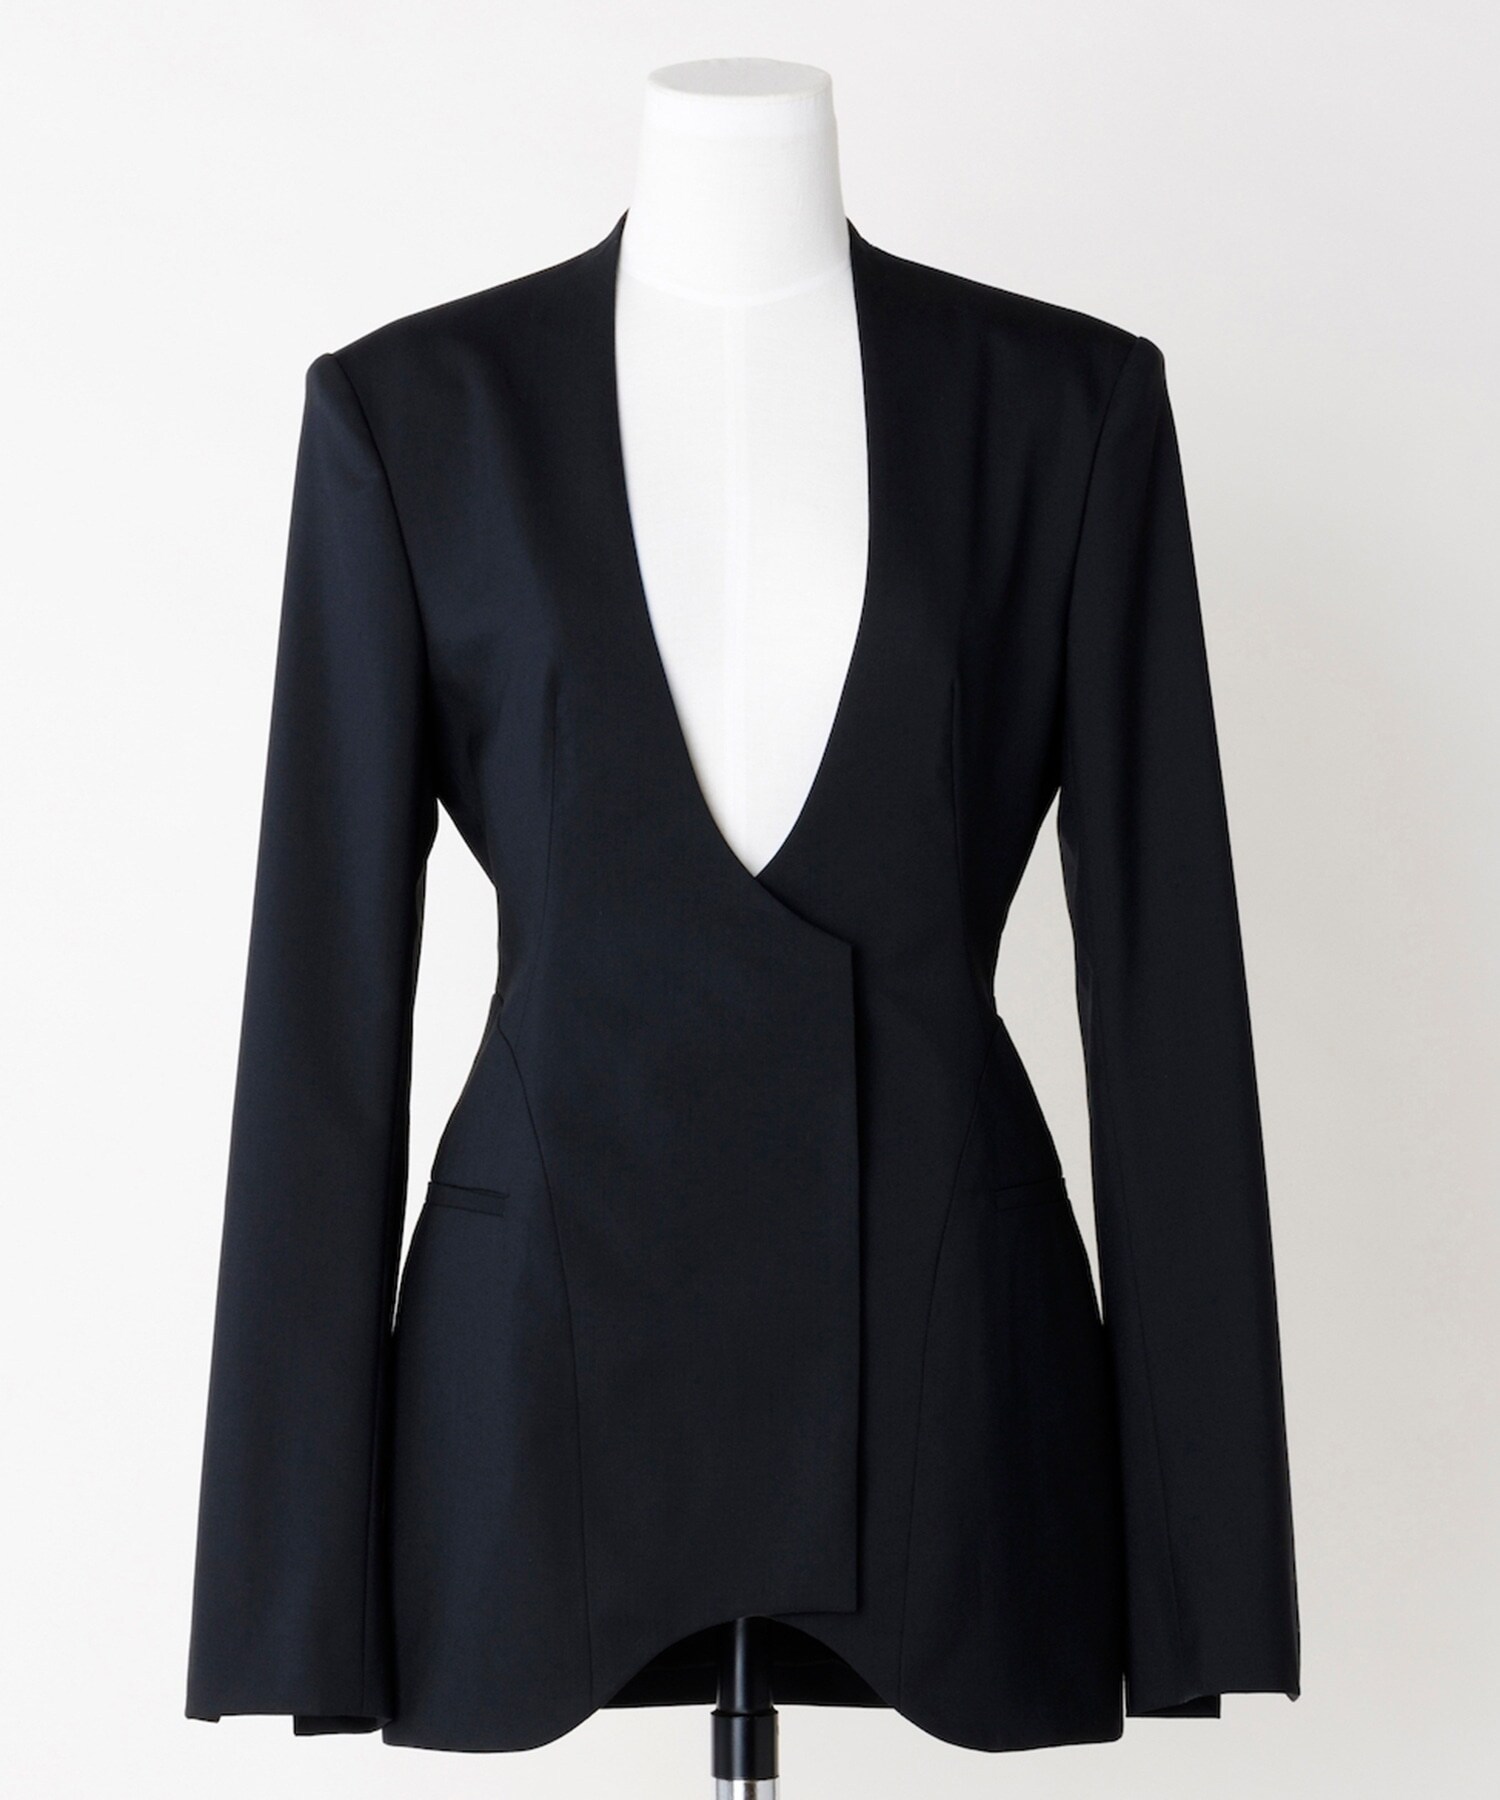 OPEN BACK TAILORED JACKET